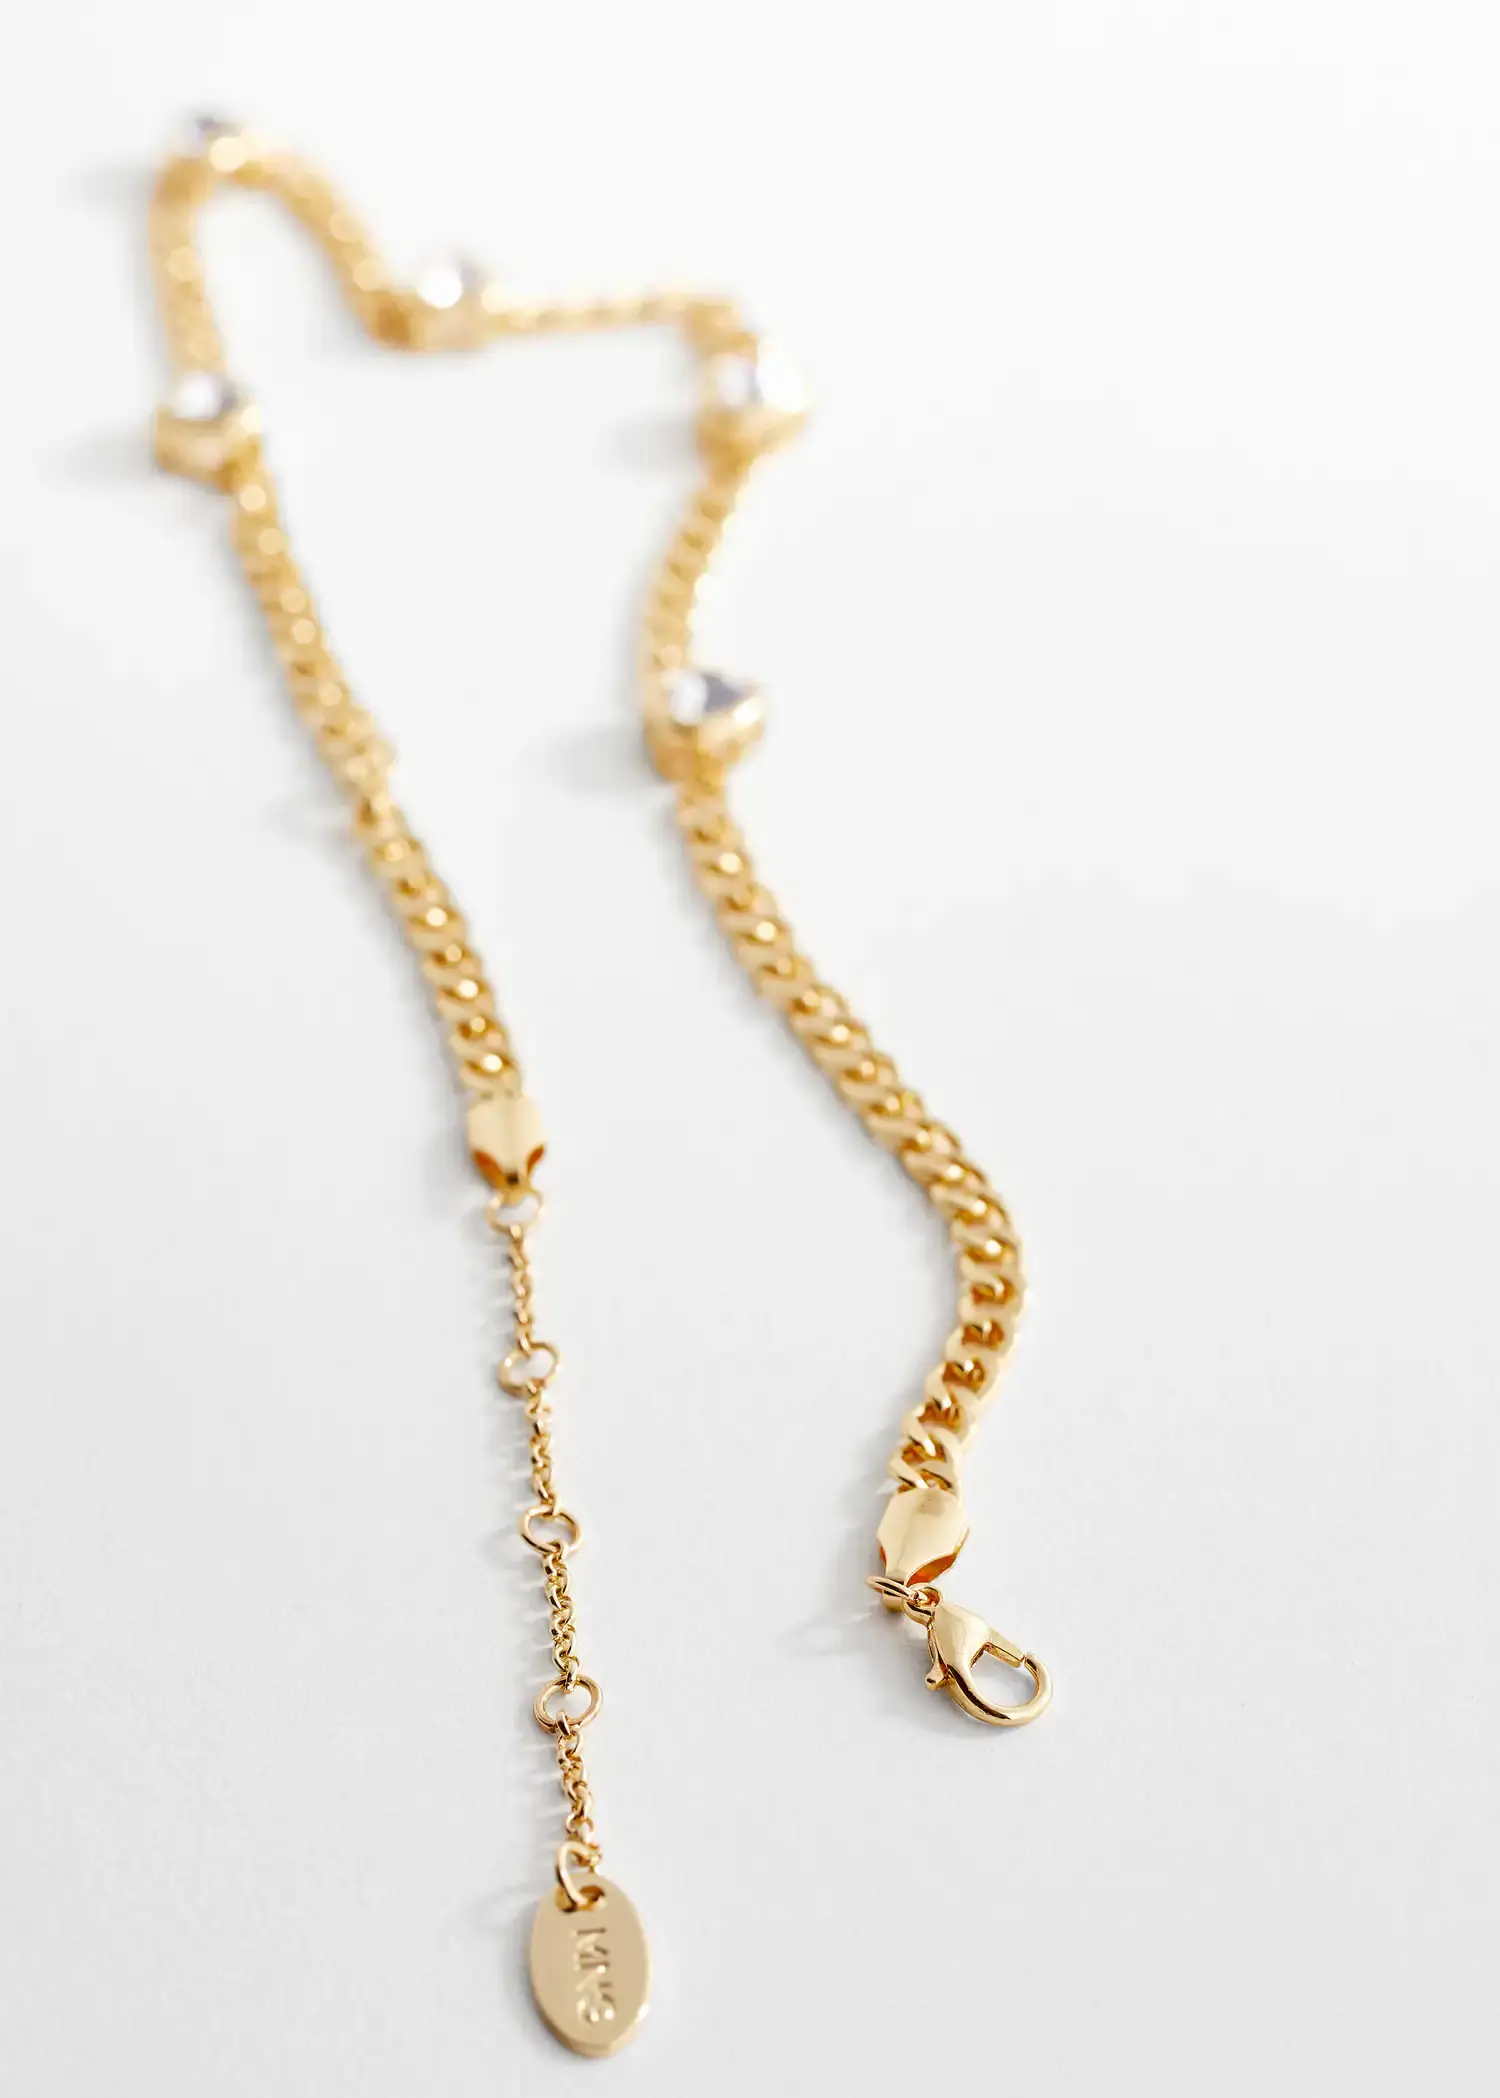 Mango Crystal chain necklace. 3